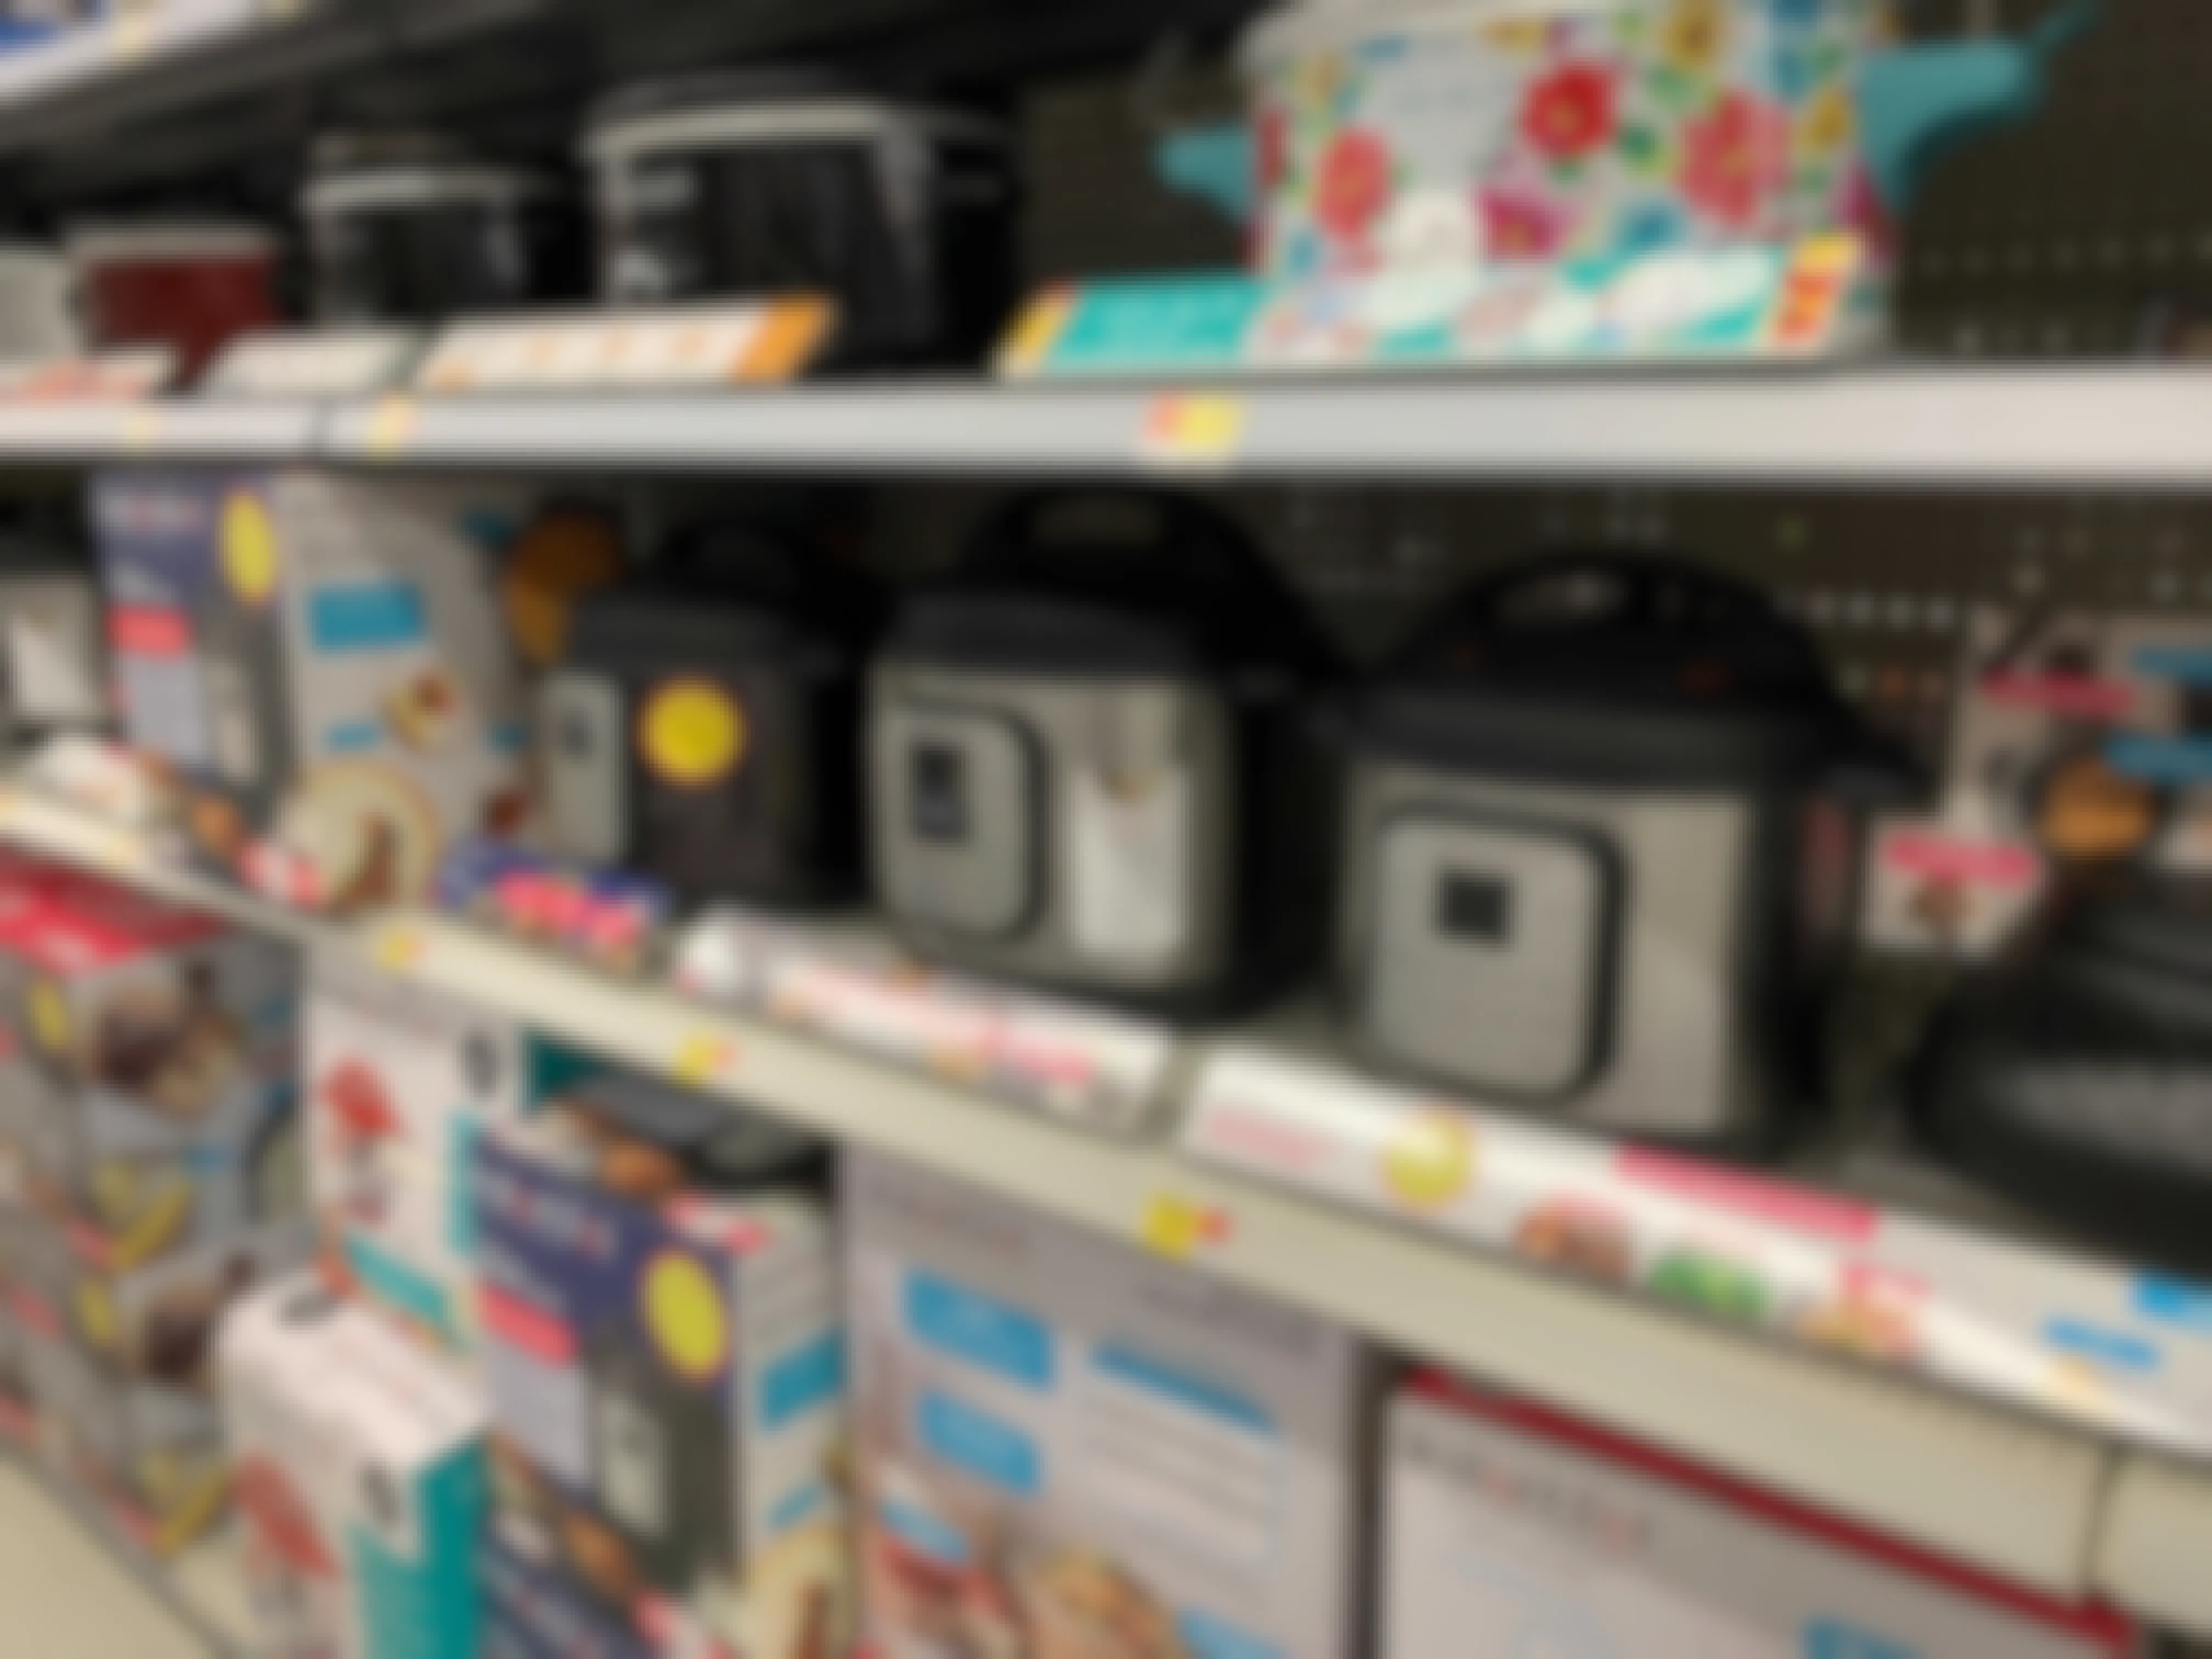 instant pot section at walmart store